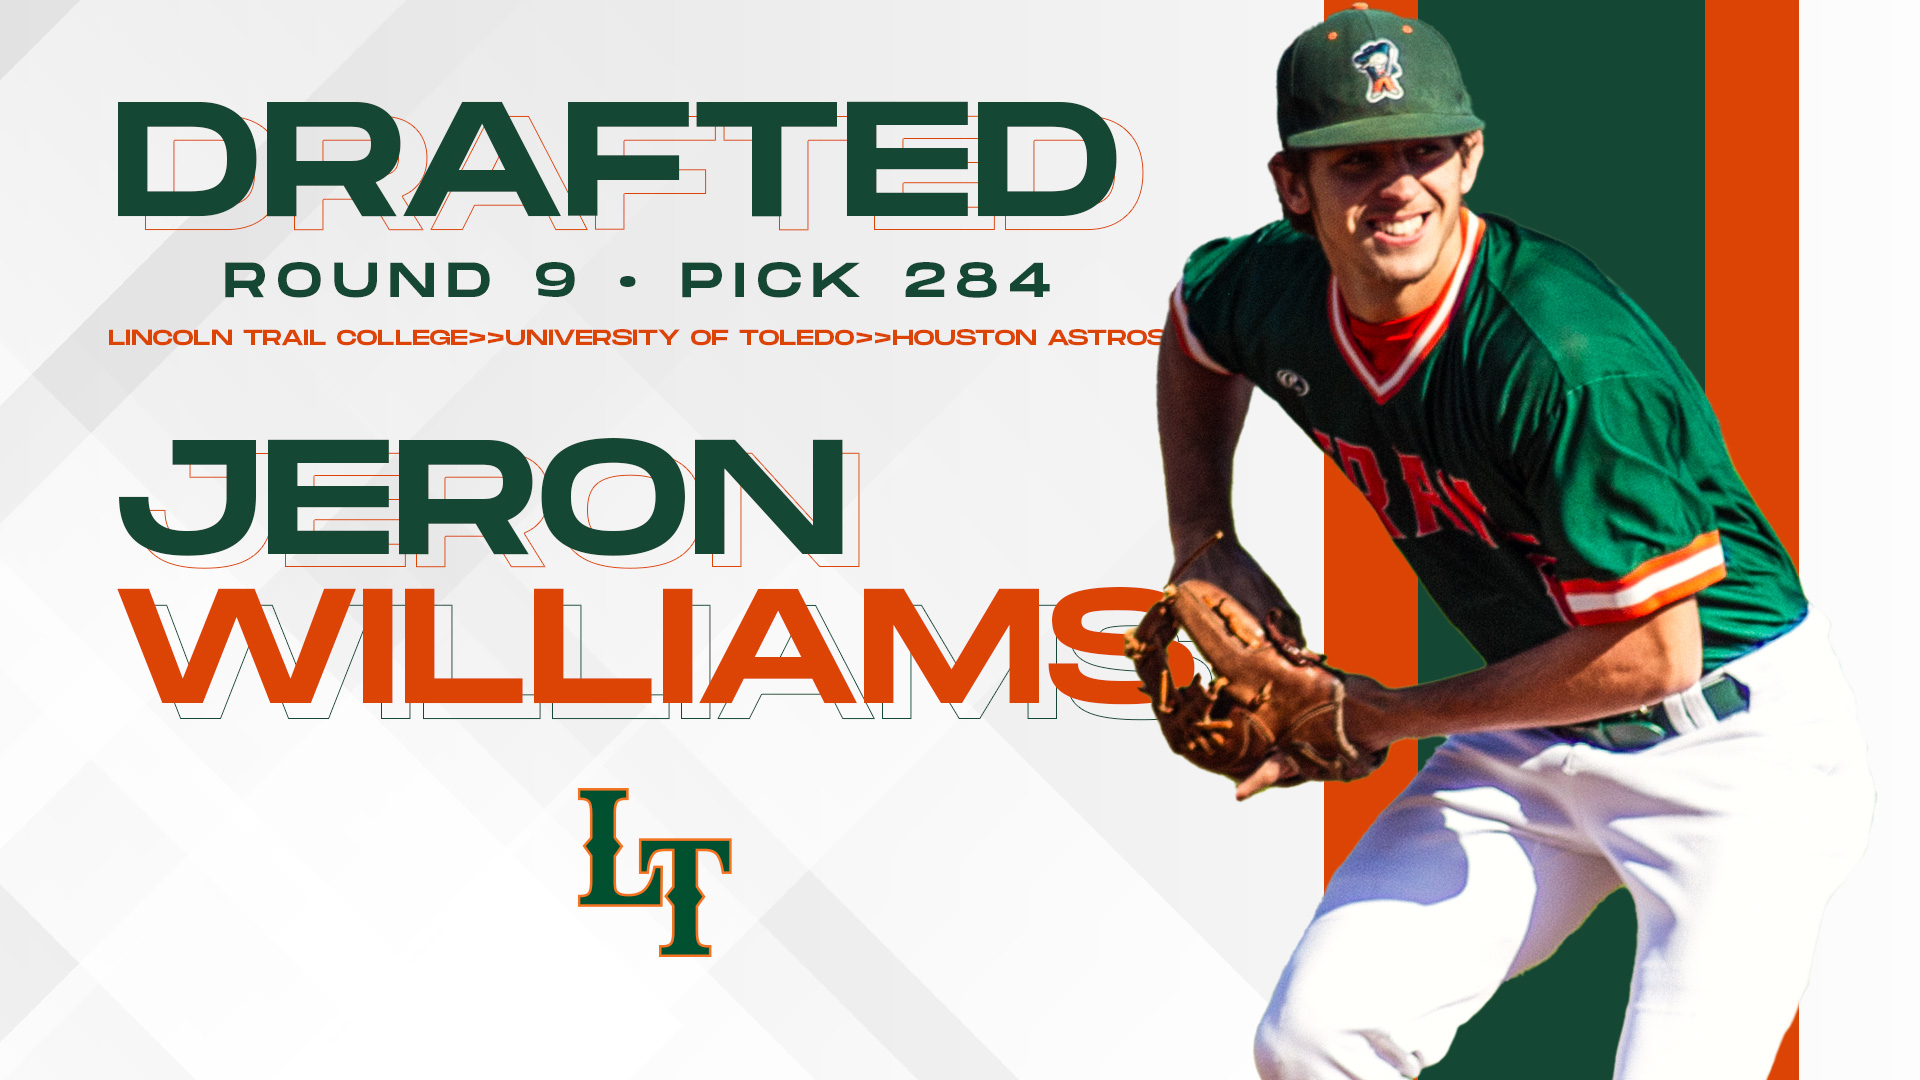 A graphic showing Jeron Williams playing baseball with text that says he was drafted in Round 9 with the 284th pick by the Houston Astros. It also shows that Williams played at Lincoln Trail College before transferring to the University of Toledo.